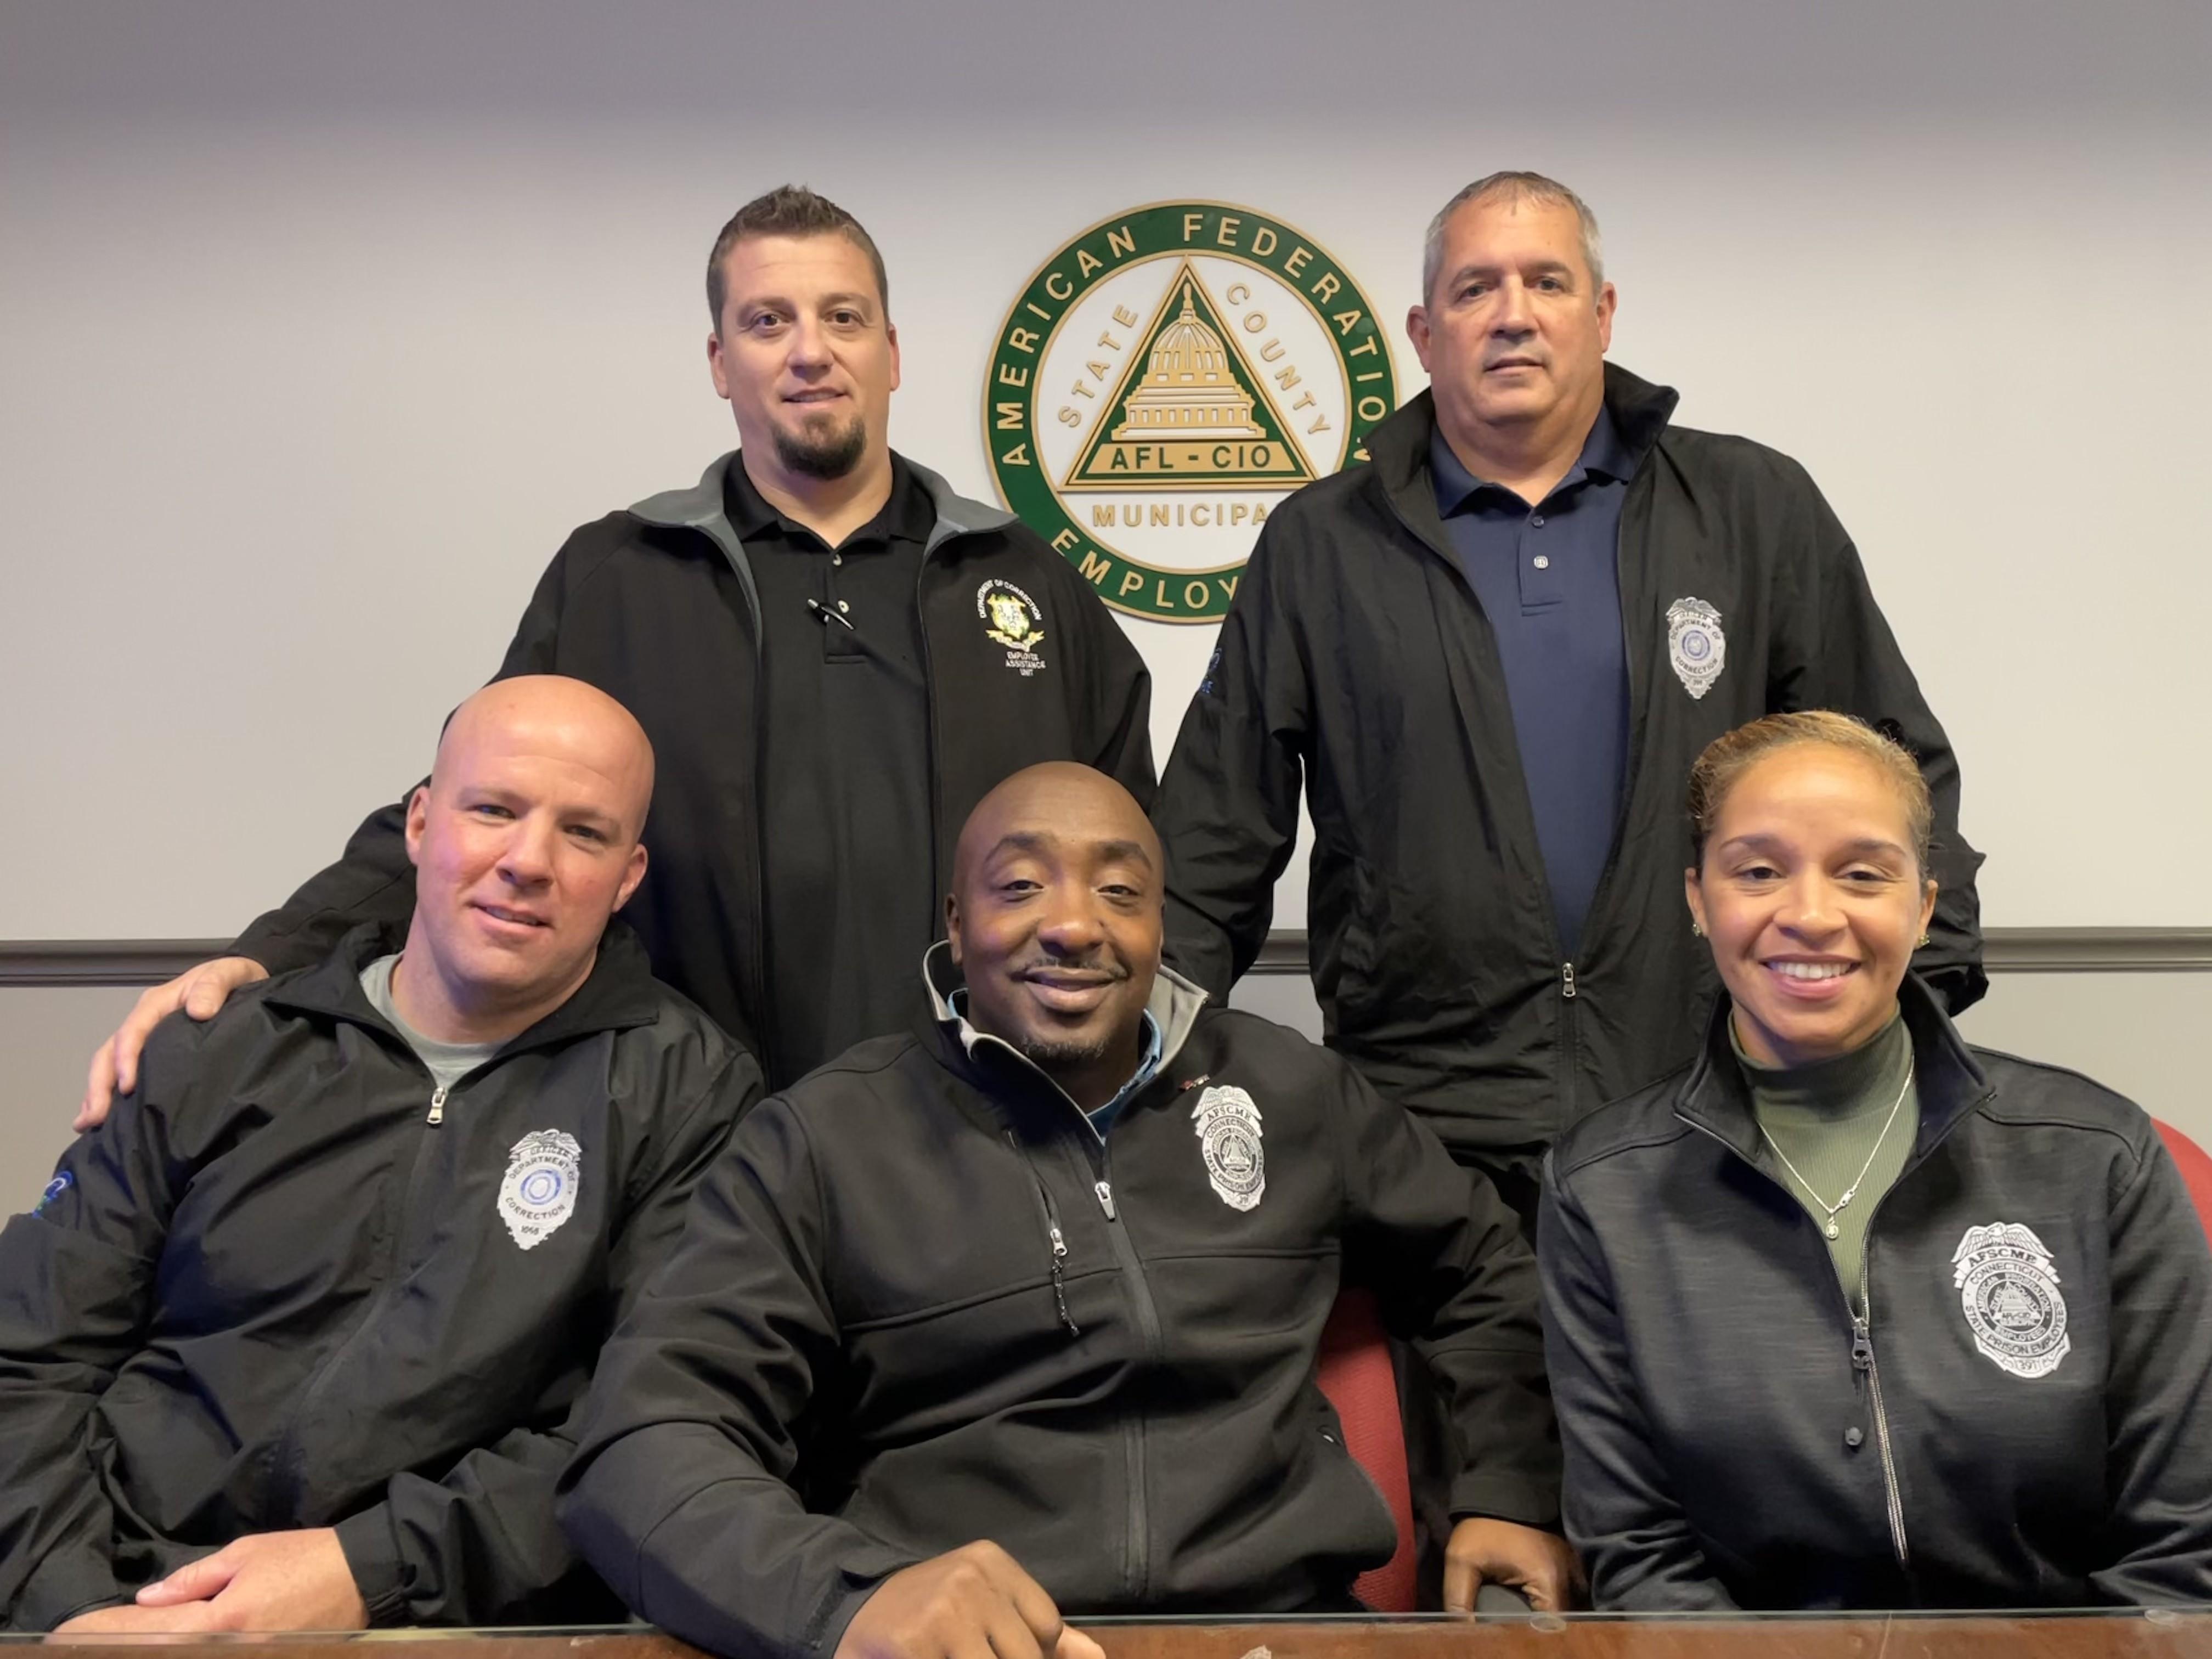 Council 4 Corrections members (L-R): Patrick McGoldrick, Local 1565 Chief Steward; Mike Vargo, Local 1565 President; Robert Beamon, Local 391 Vice President; Collin Provost, Local 391 President; Aimmee Reyes-Greaves, Local 391 Executive Board member.